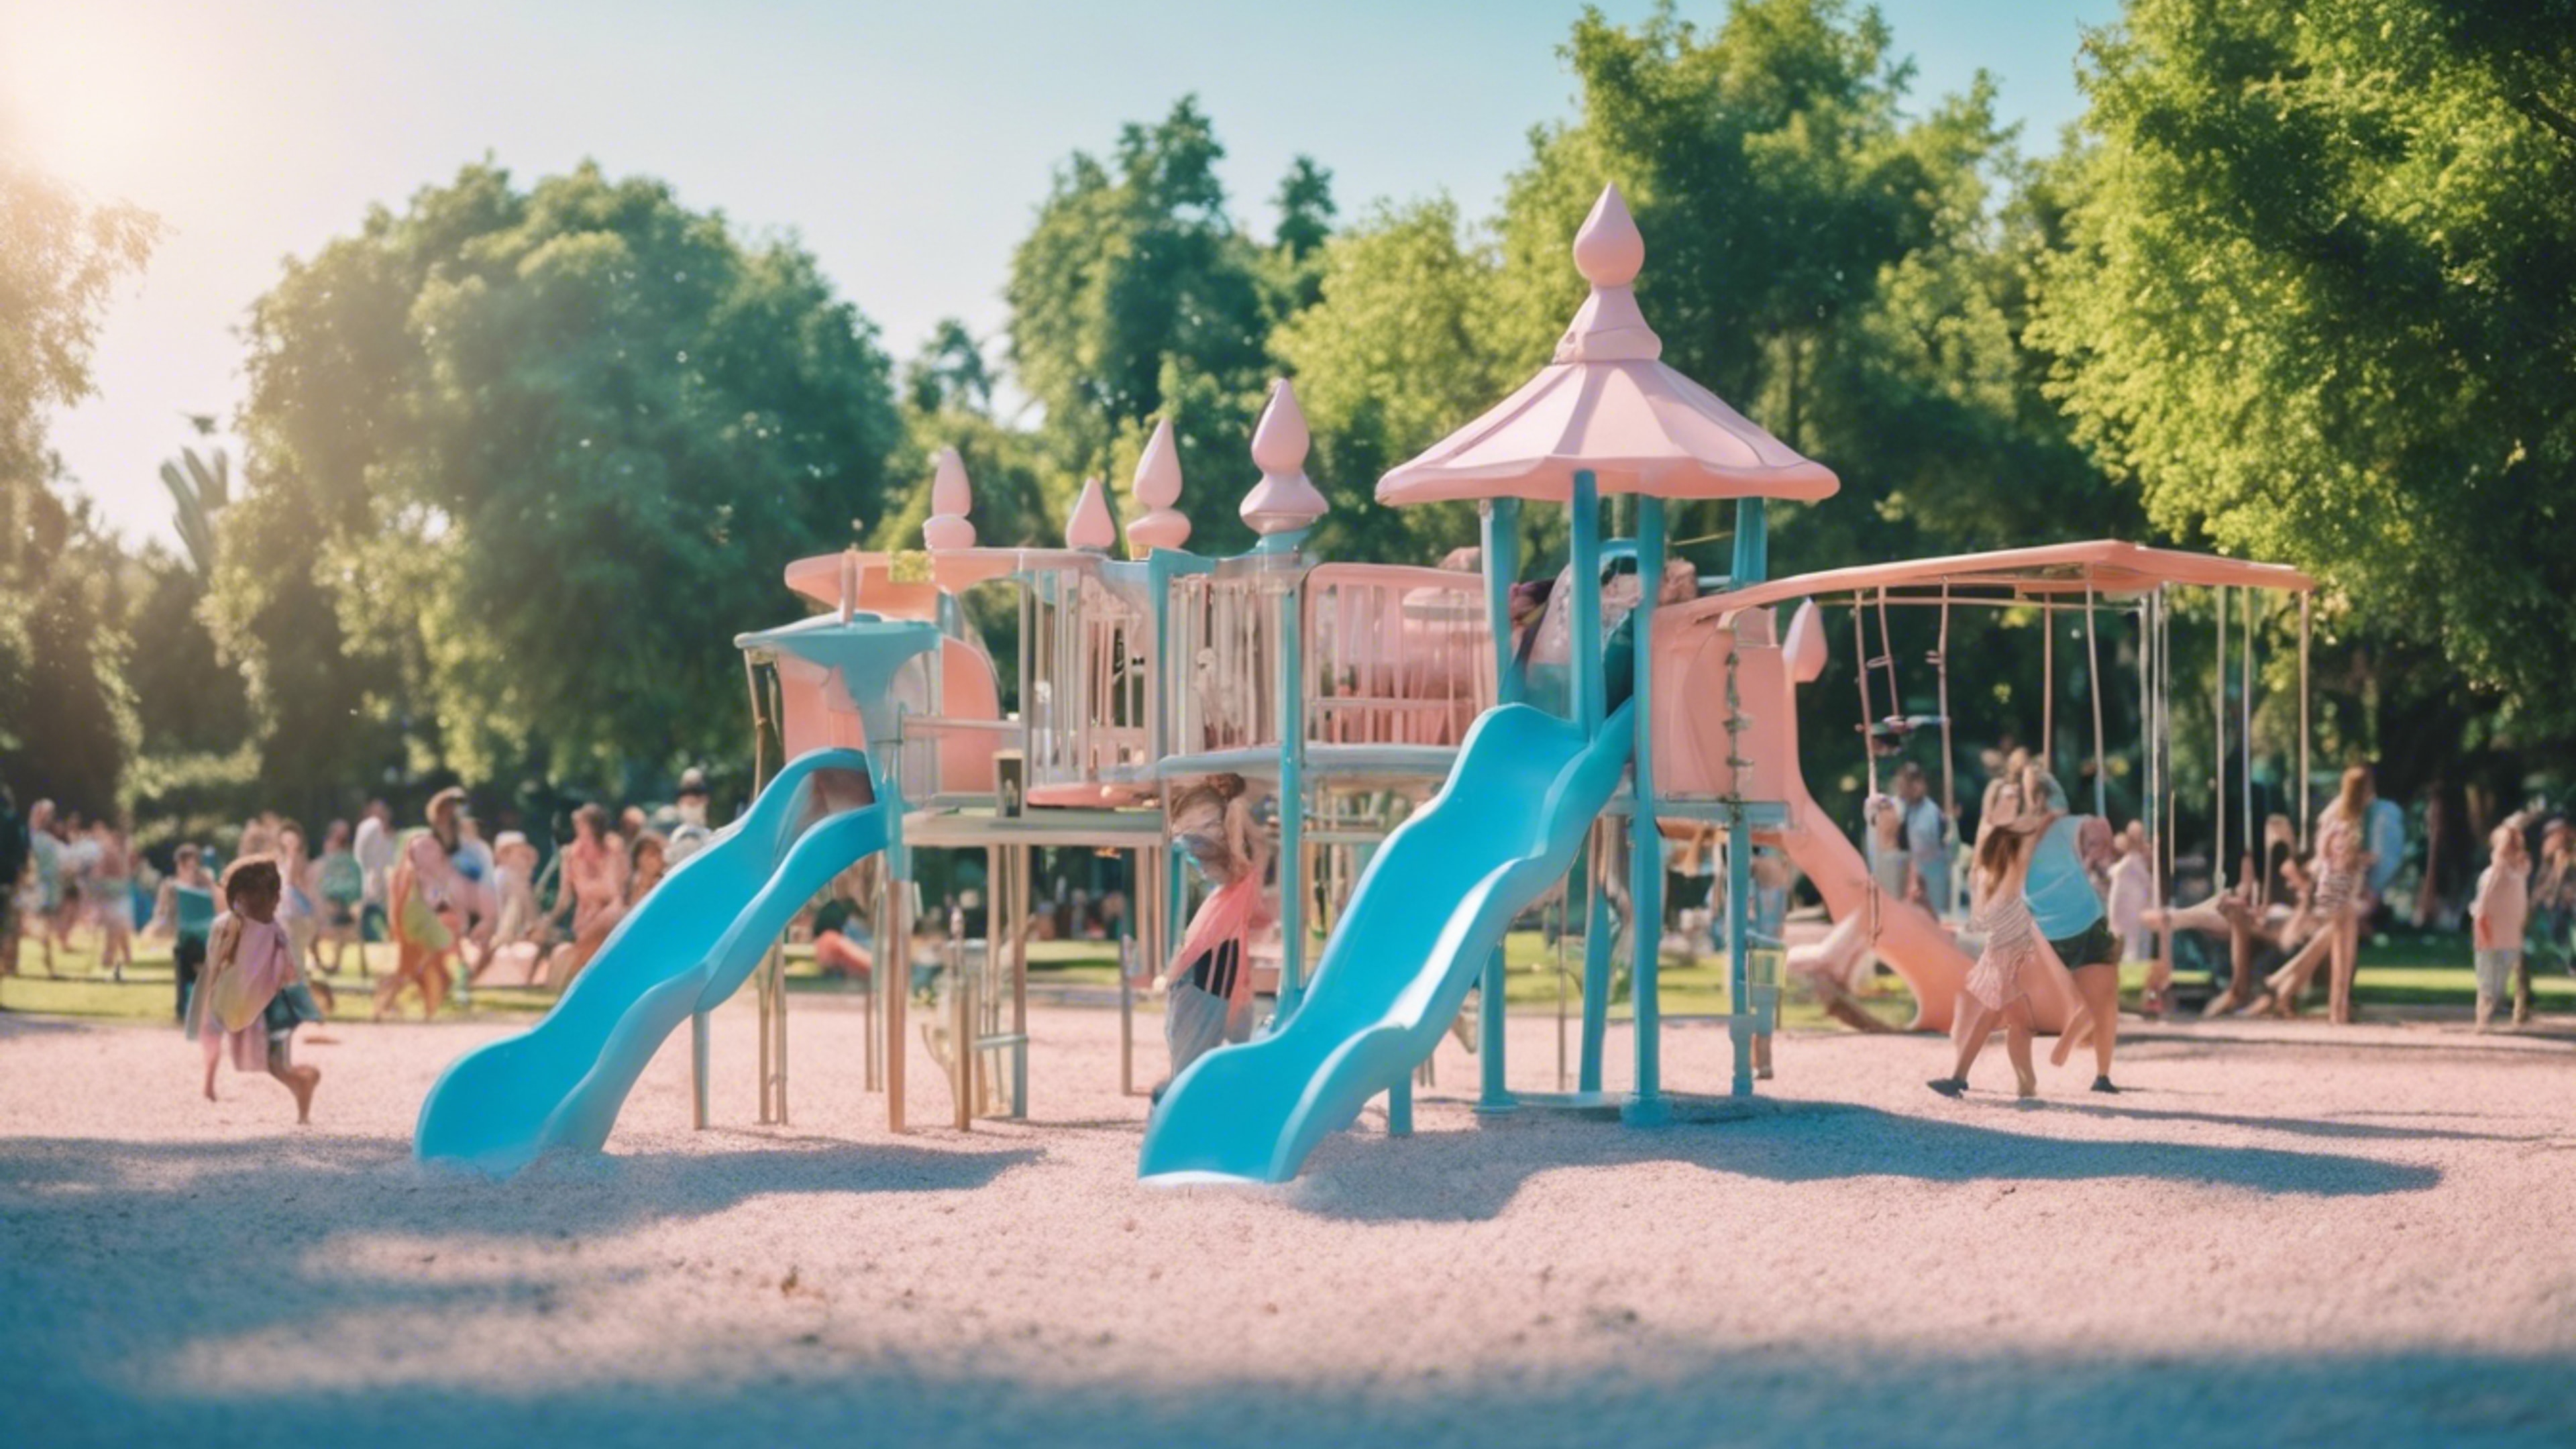 A bright pastel blue playground in a lively public park, bustling with kids.壁紙[d7bf1102c17e4700a3c3]